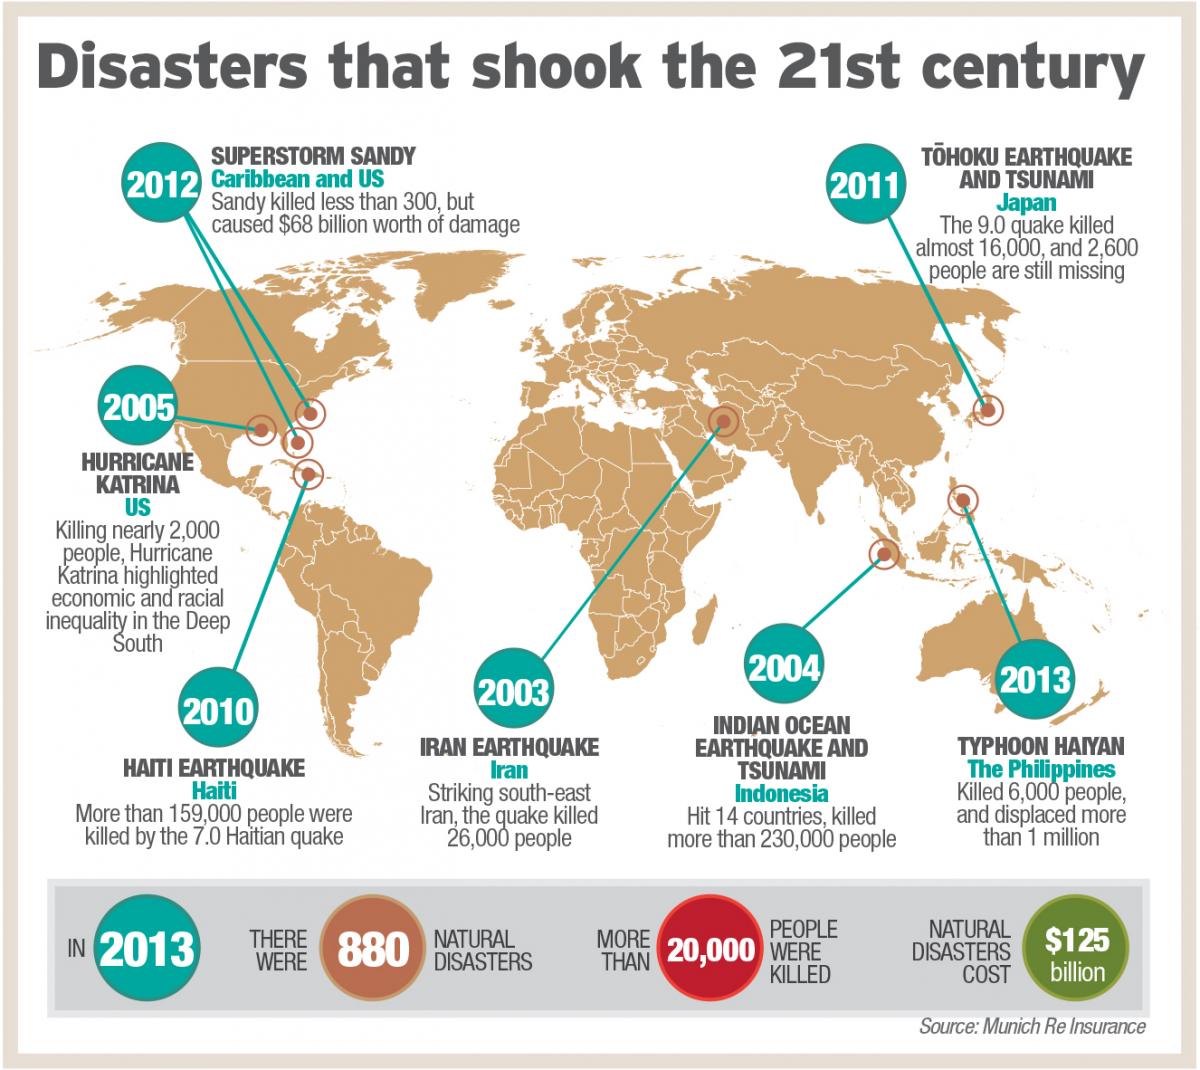 Disasters that shook the 21st century - Click to enlarge